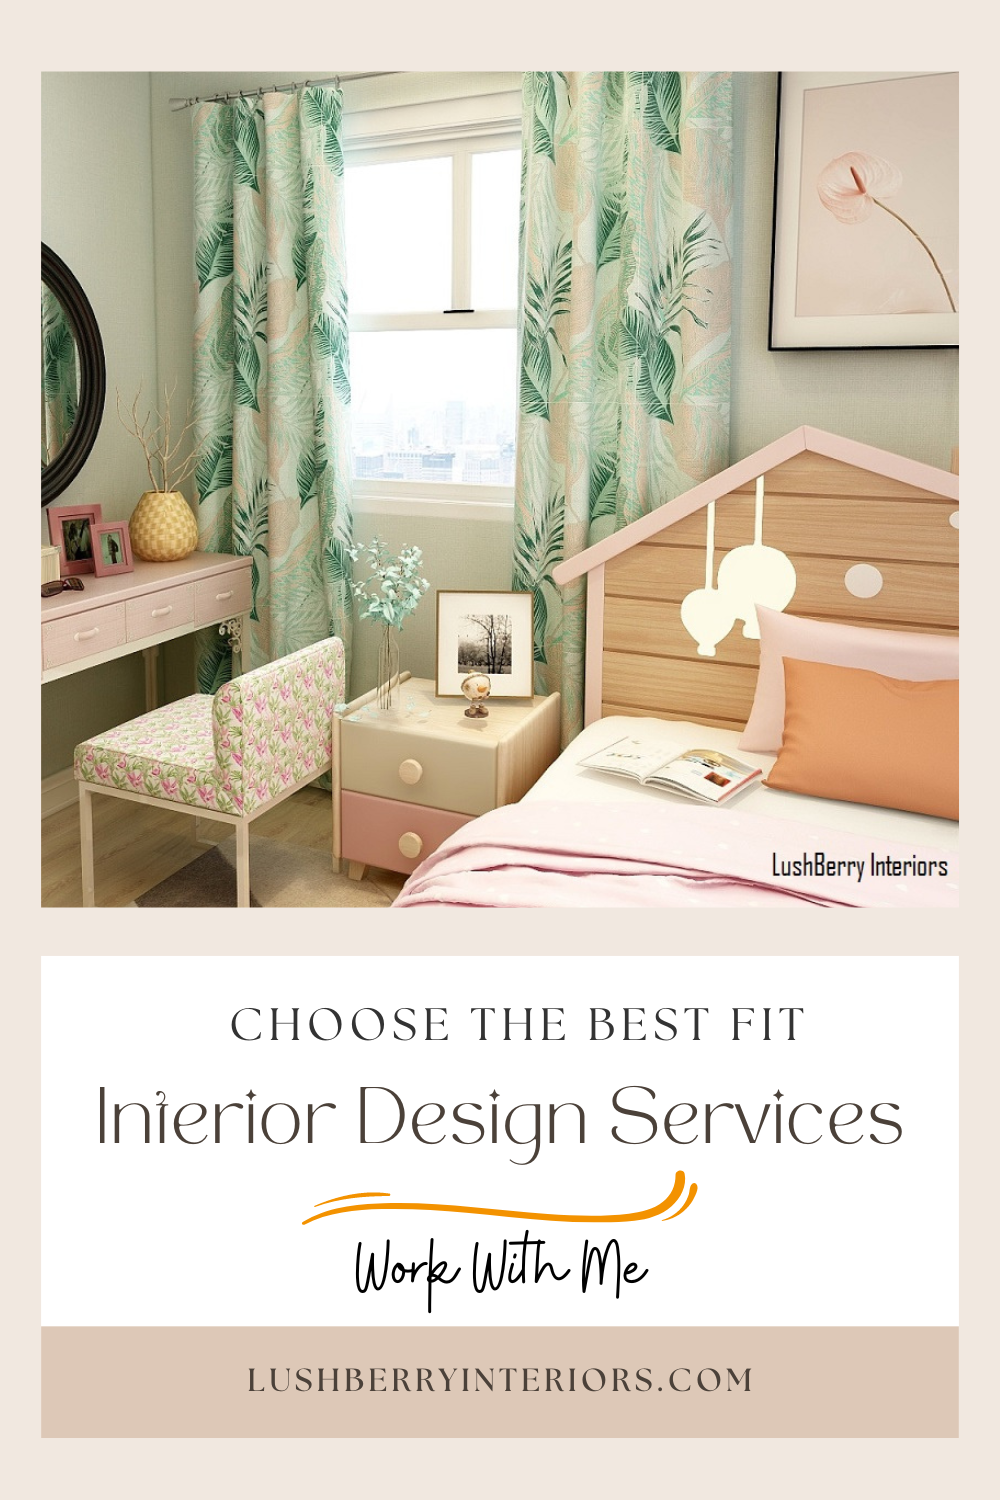 Choose from our Interior Design Services